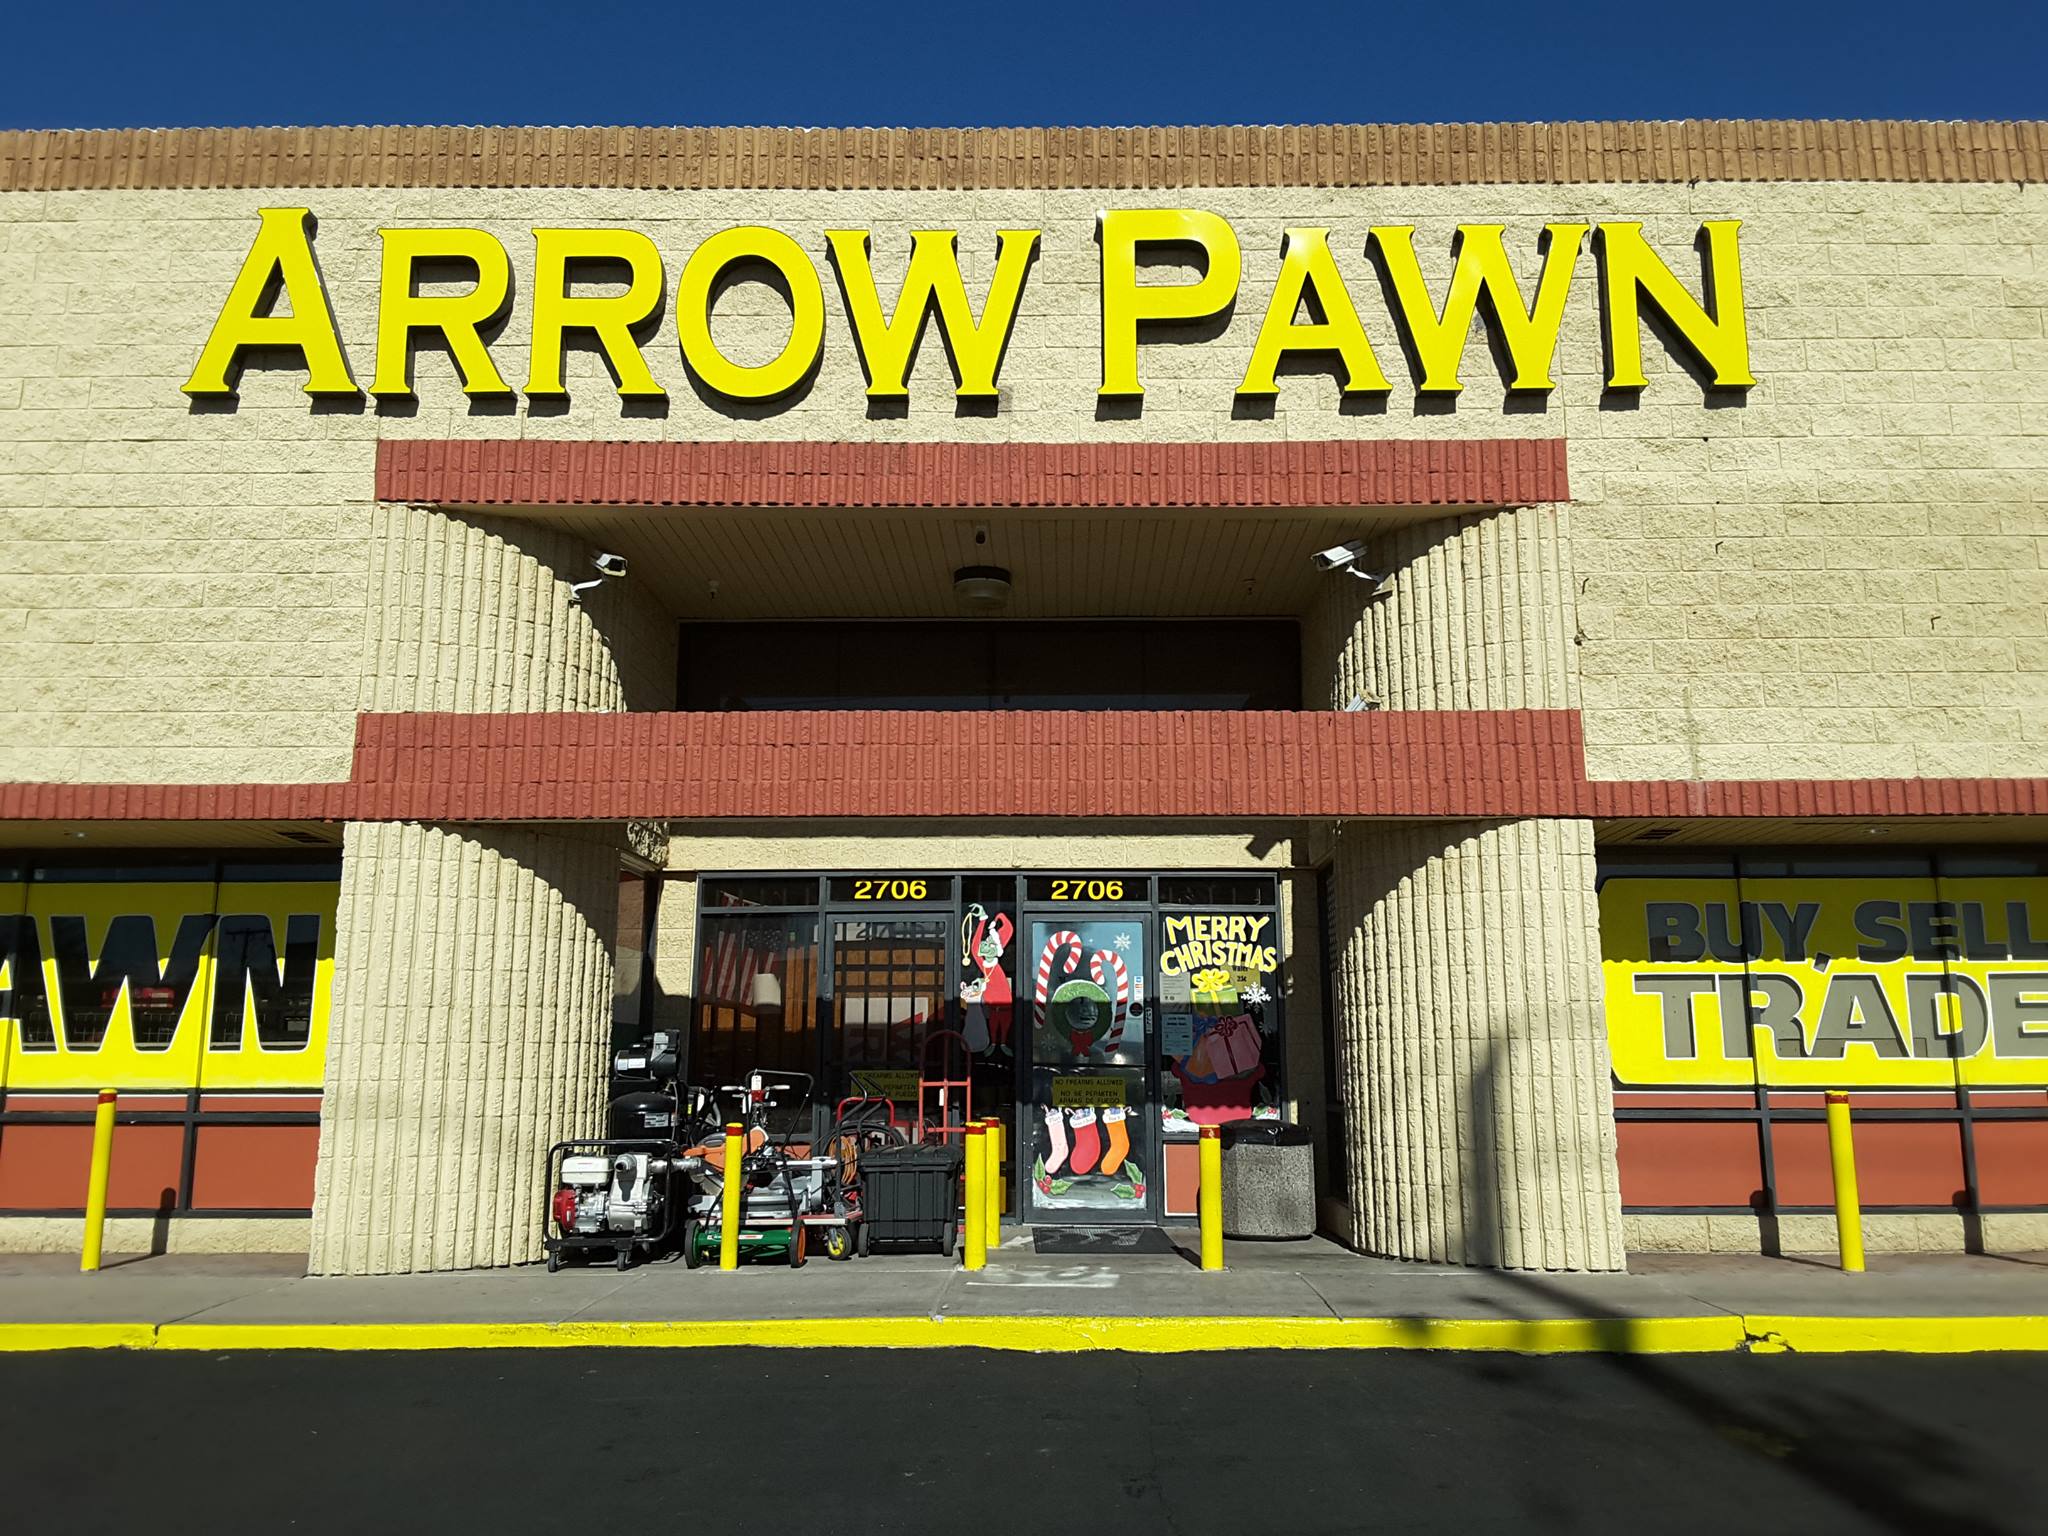 Axel's Pawn Shop Announced They Launched a Program to Buy, Pawn